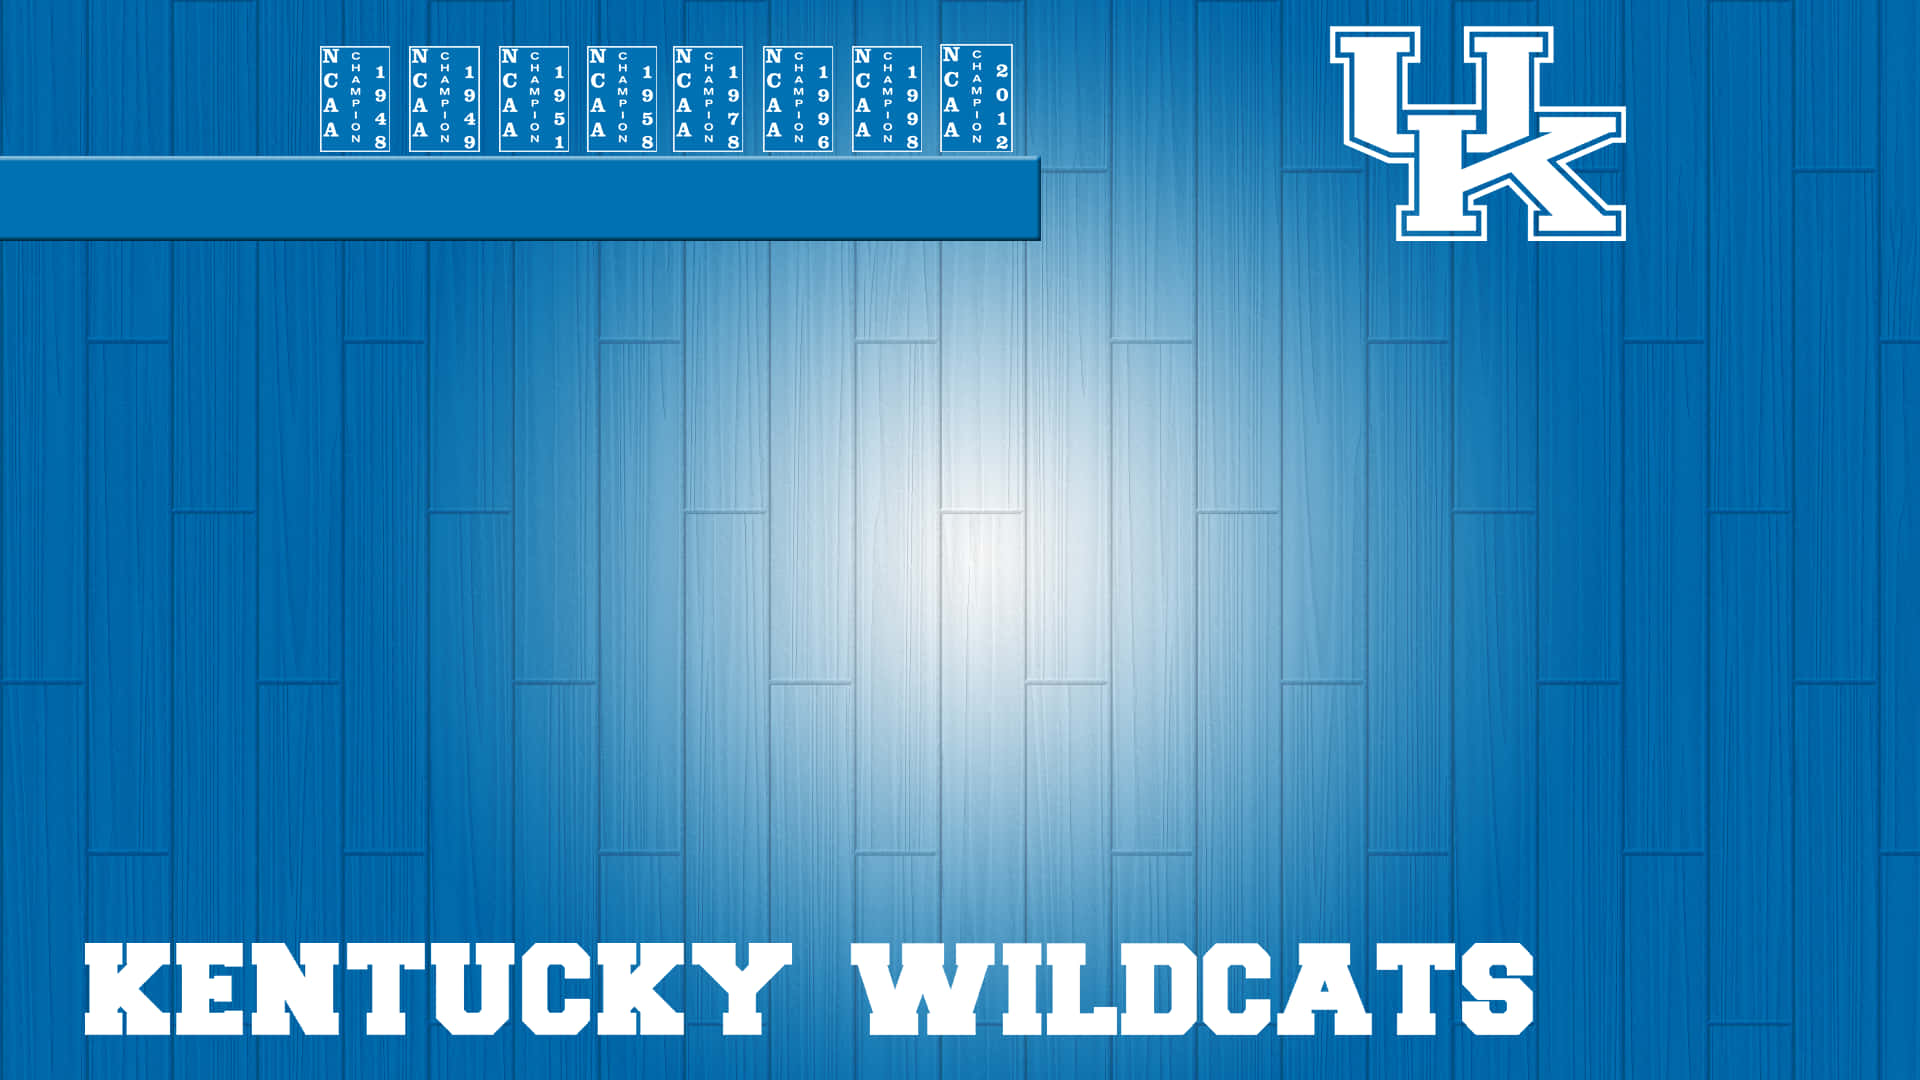 Celebrate the Wildcats — the pride and passion of Kentucky Basketball Wallpaper